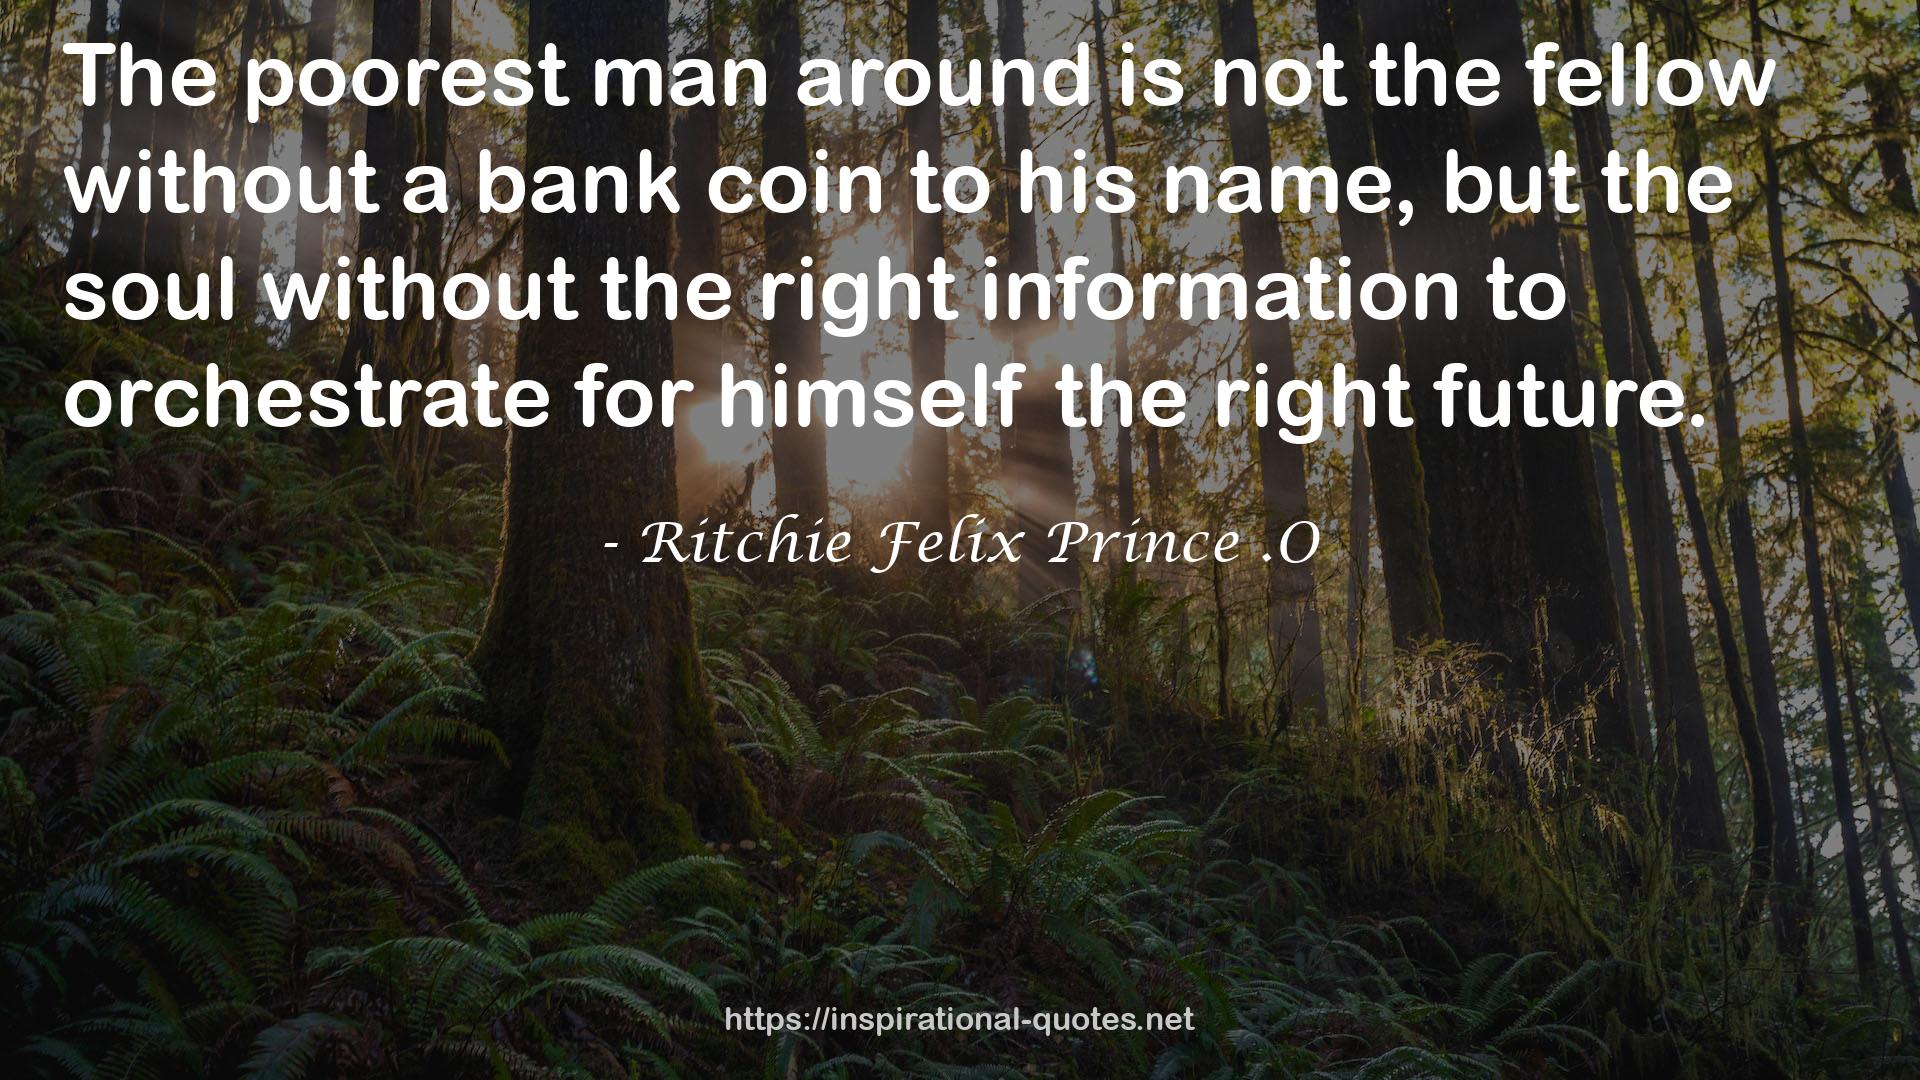 Ritchie Felix Prince .O QUOTES